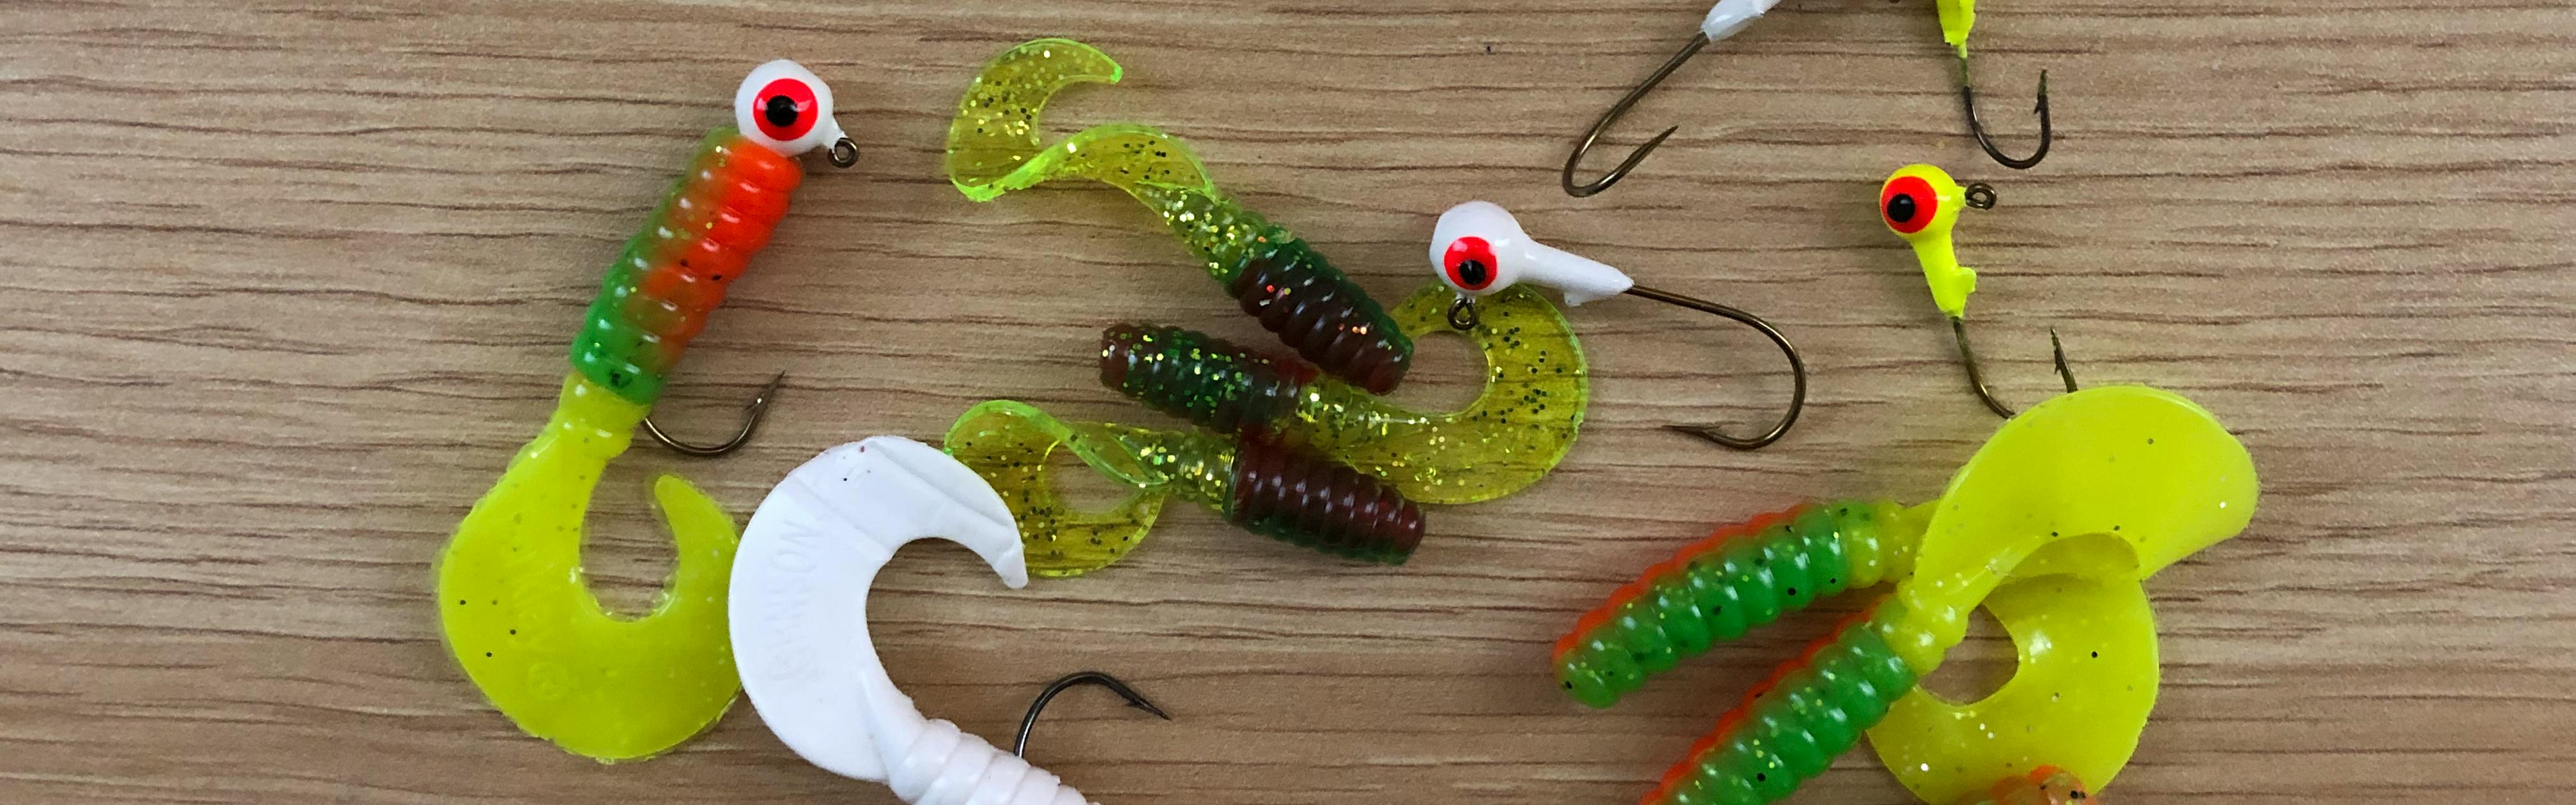 2" Pearl Hot Grubs Twister Tails Crappie Walleye Bass Fishing Lures 